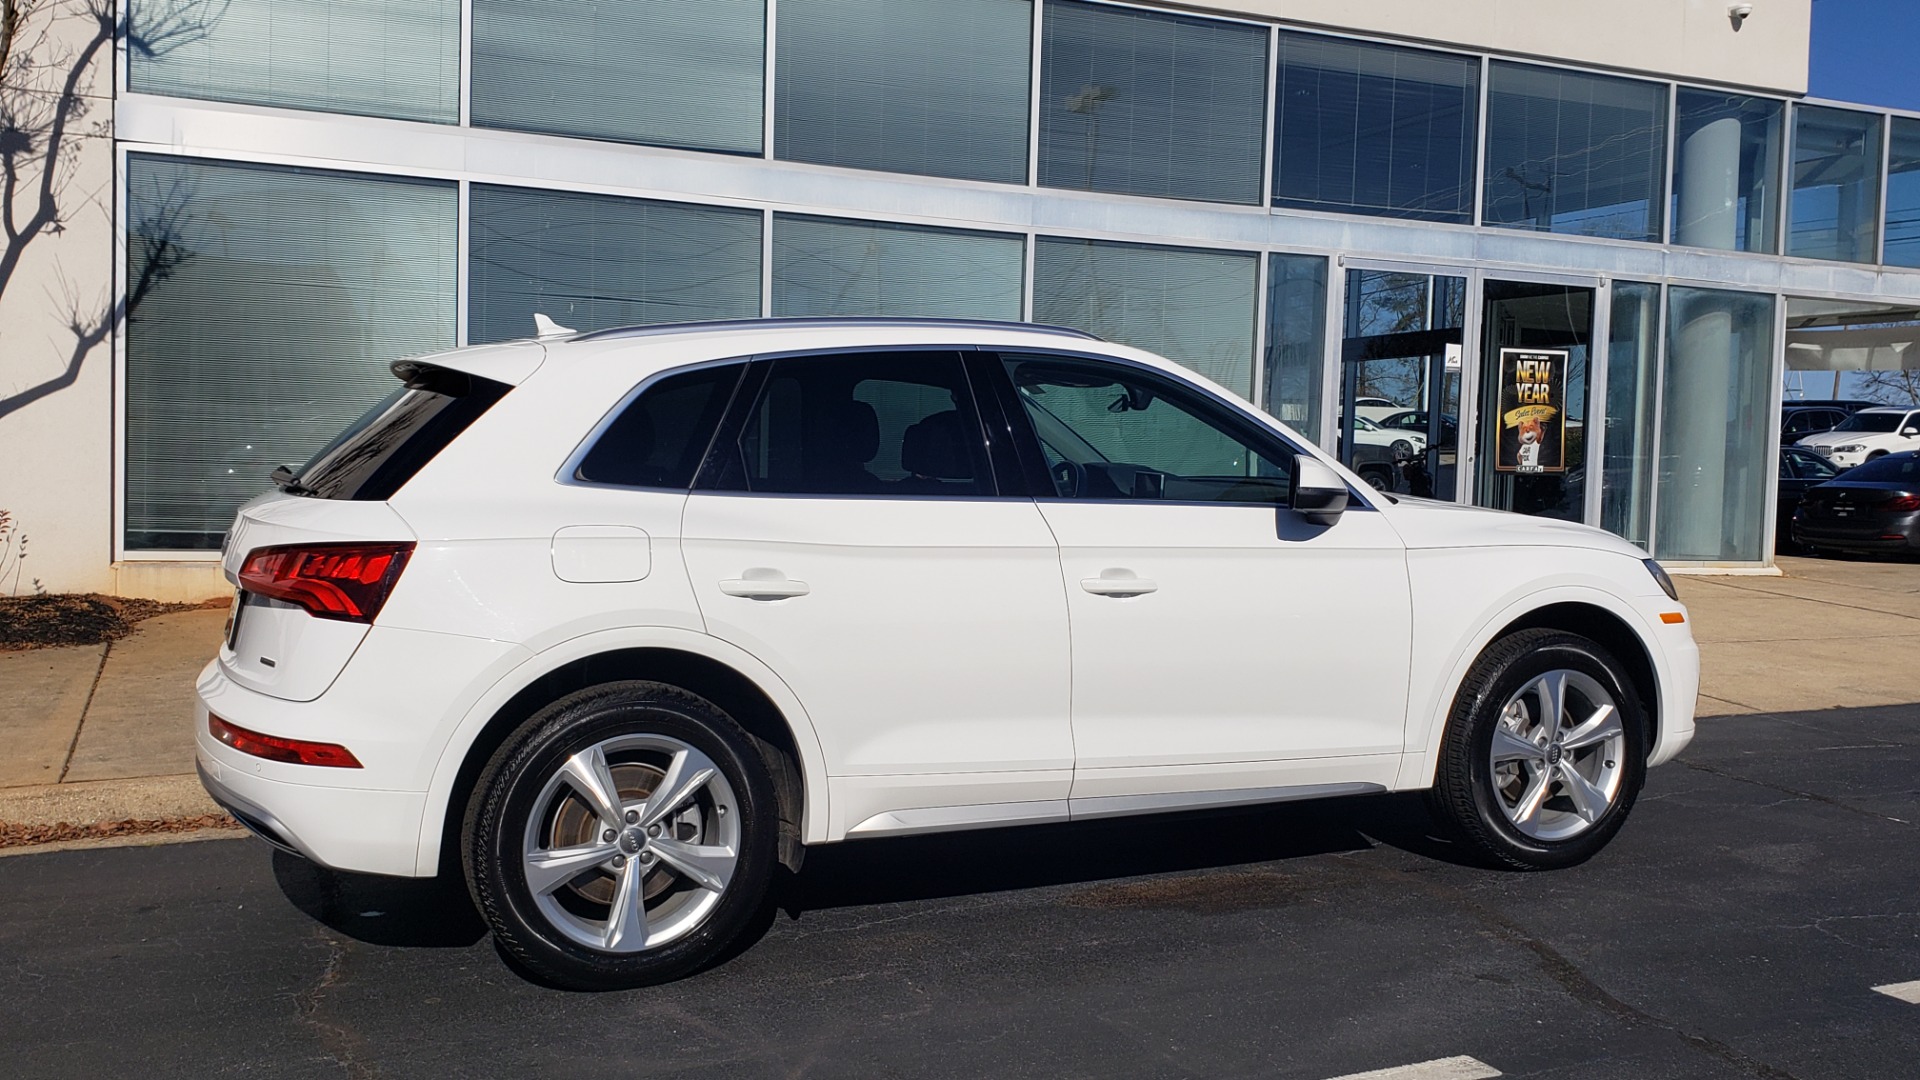 Used 2019 Audi Q5 PREMIUM PLUS 2.0L / AWD / NAV / PANO-ROOF / DRVR ASST / REARVIEW for sale $38,795 at Formula Imports in Charlotte NC 28227 7